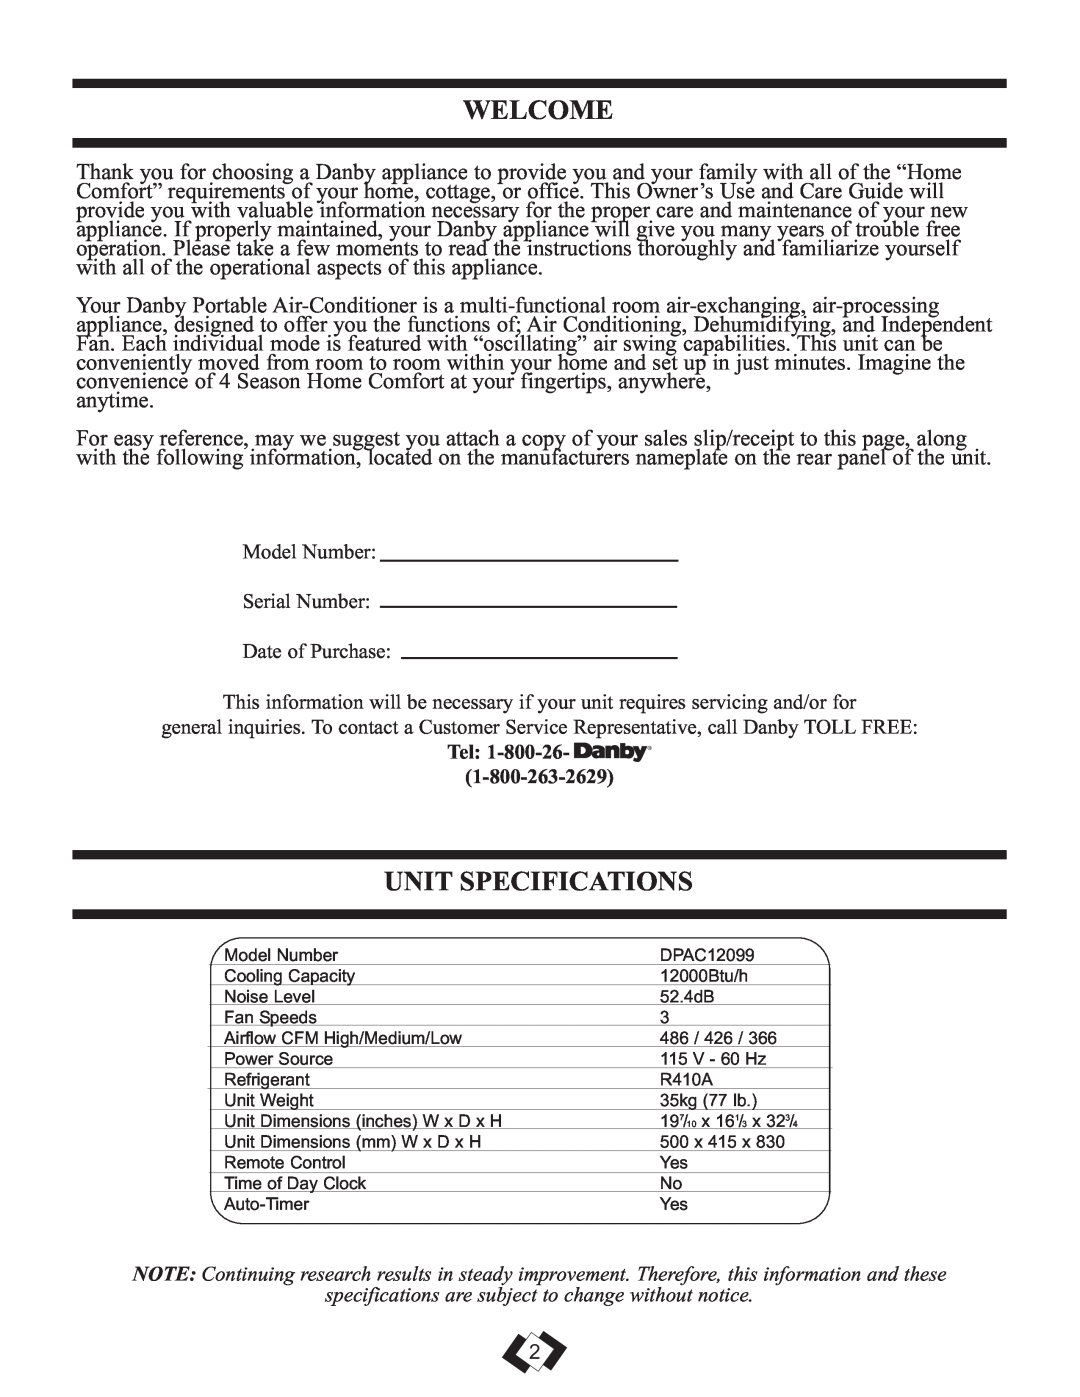 Danby DPAC 12099 manual Welcome, Unit Specifications 